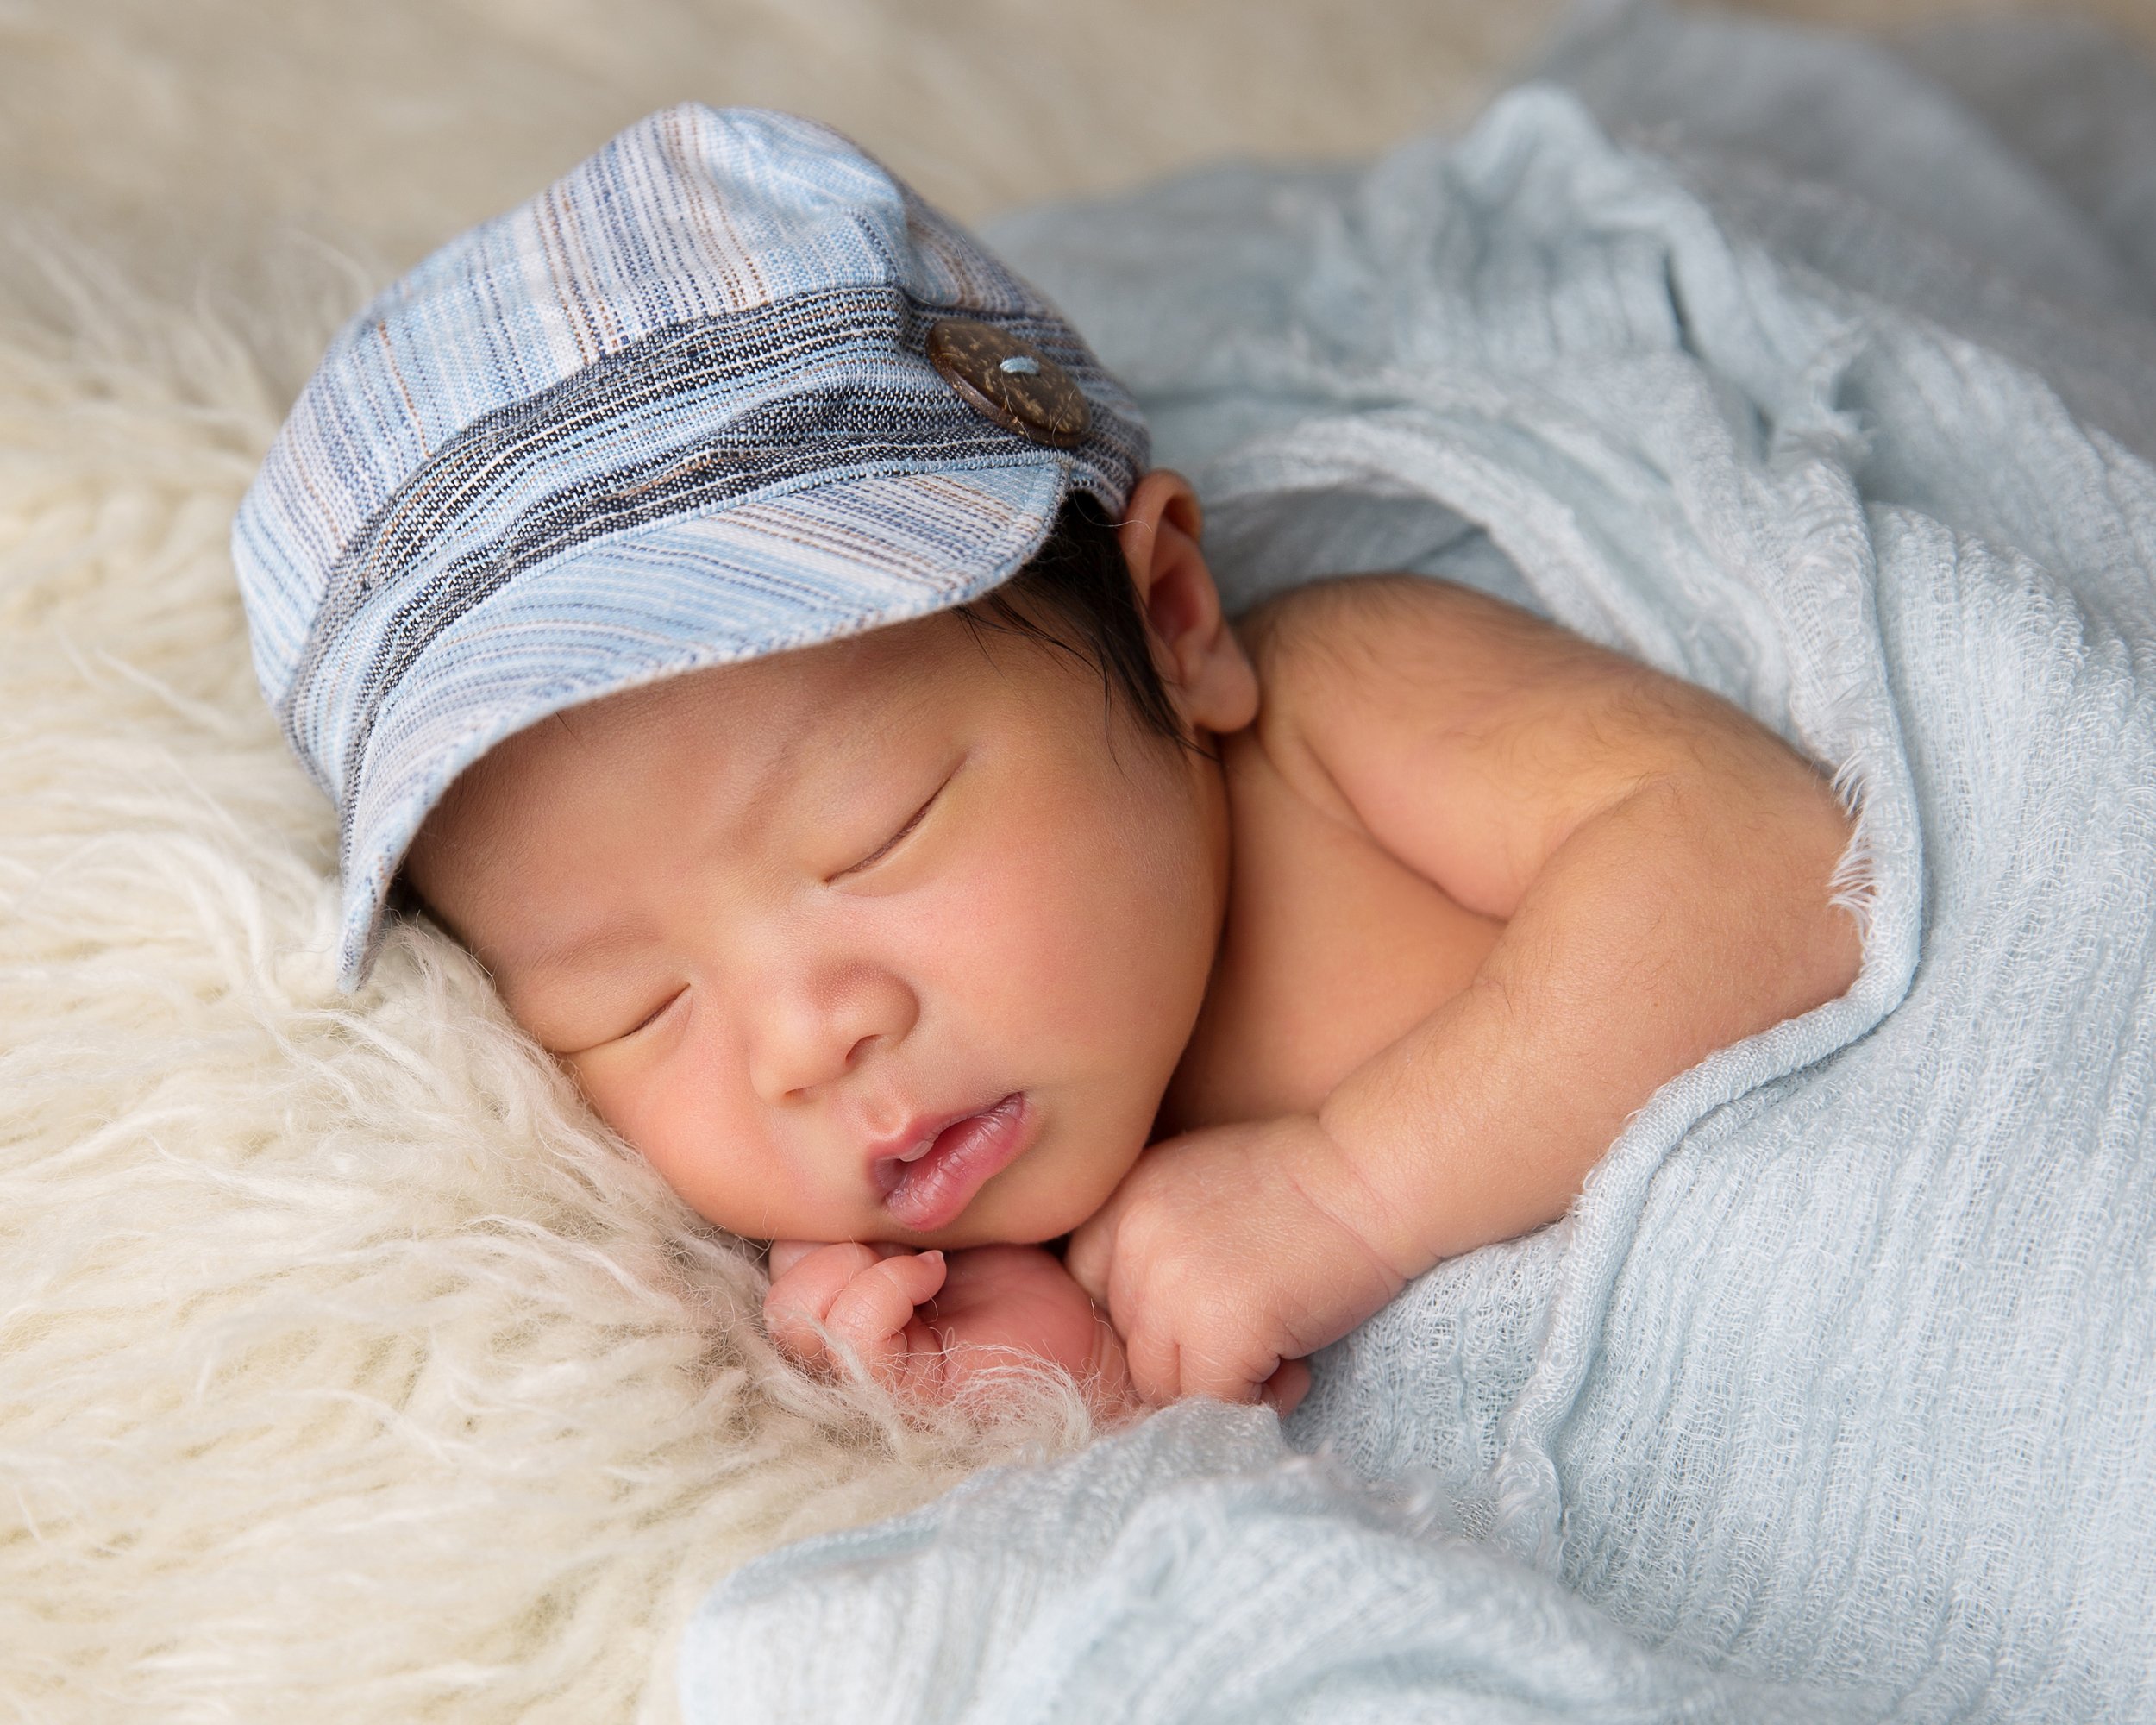  Natasha offers newborn photography and baby photoshoots within your Buckinghamshire Home. Natasha covers Gerrards Cross, Marlow, High Wycombe, Beaconsfield, Bourne End, Taplow, Seer Green, Cookham, Iver, Denham, Harefield and South Buckinghamshire. 